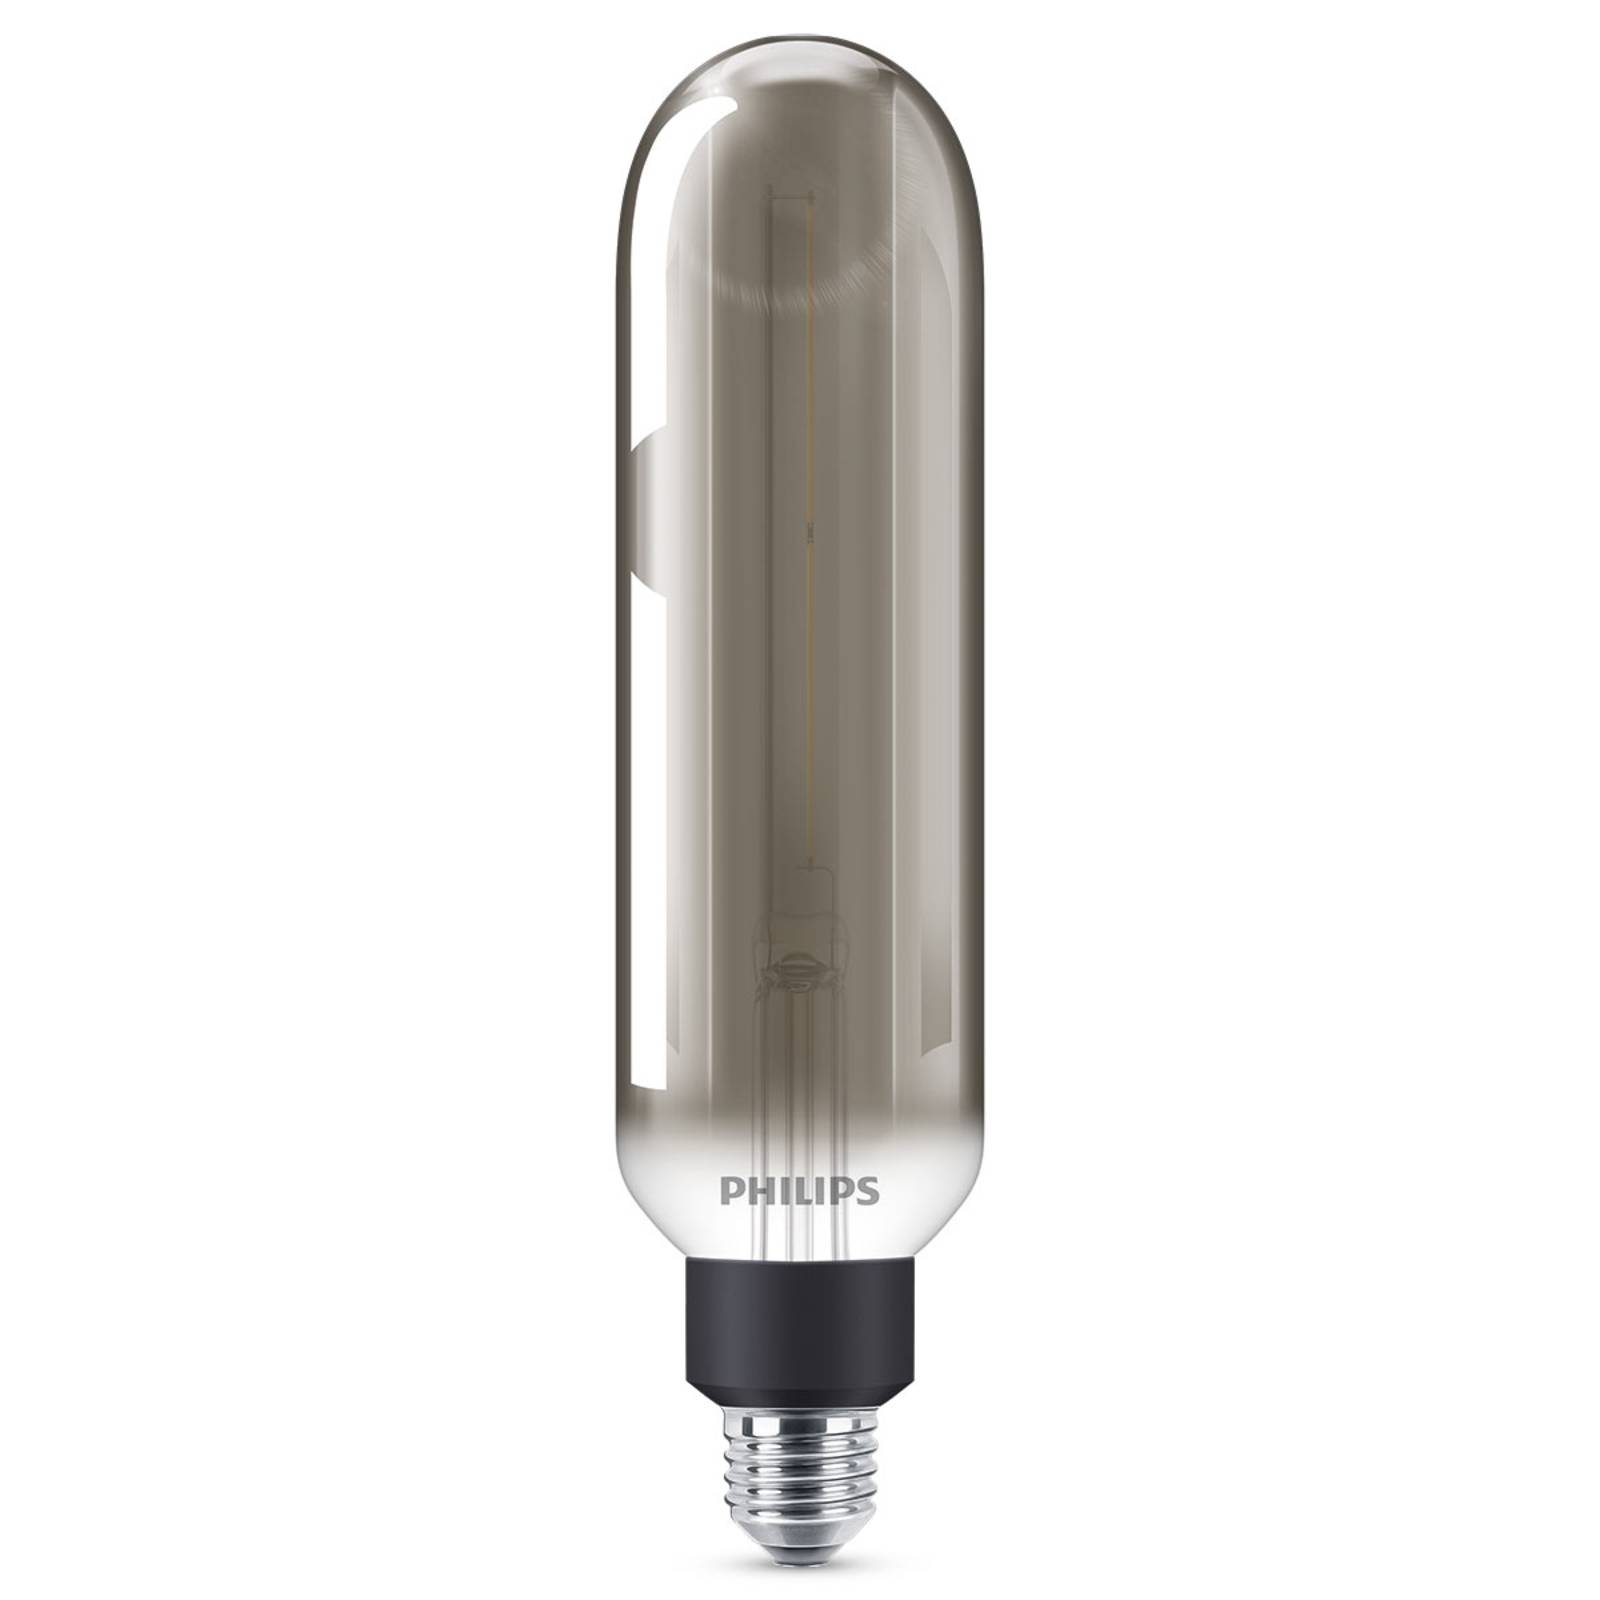 Philips E27 Giant LED-Röhrenlampe 6,5W dimmb smoky von Philips